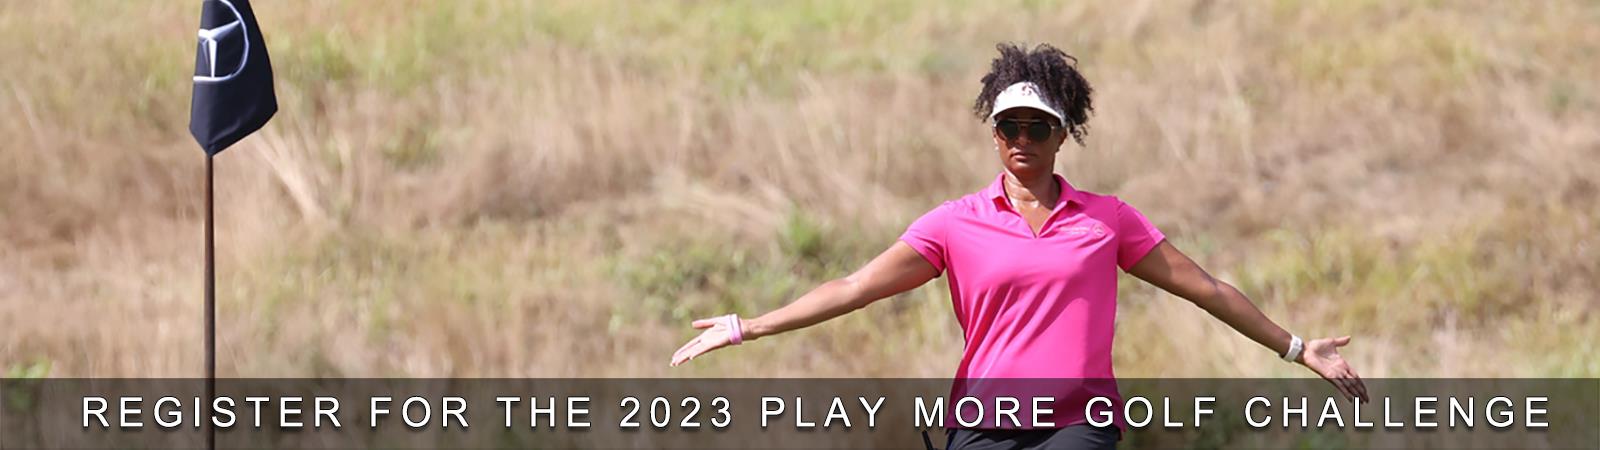 2021_Challenge_to_Play_More_Golf_Final